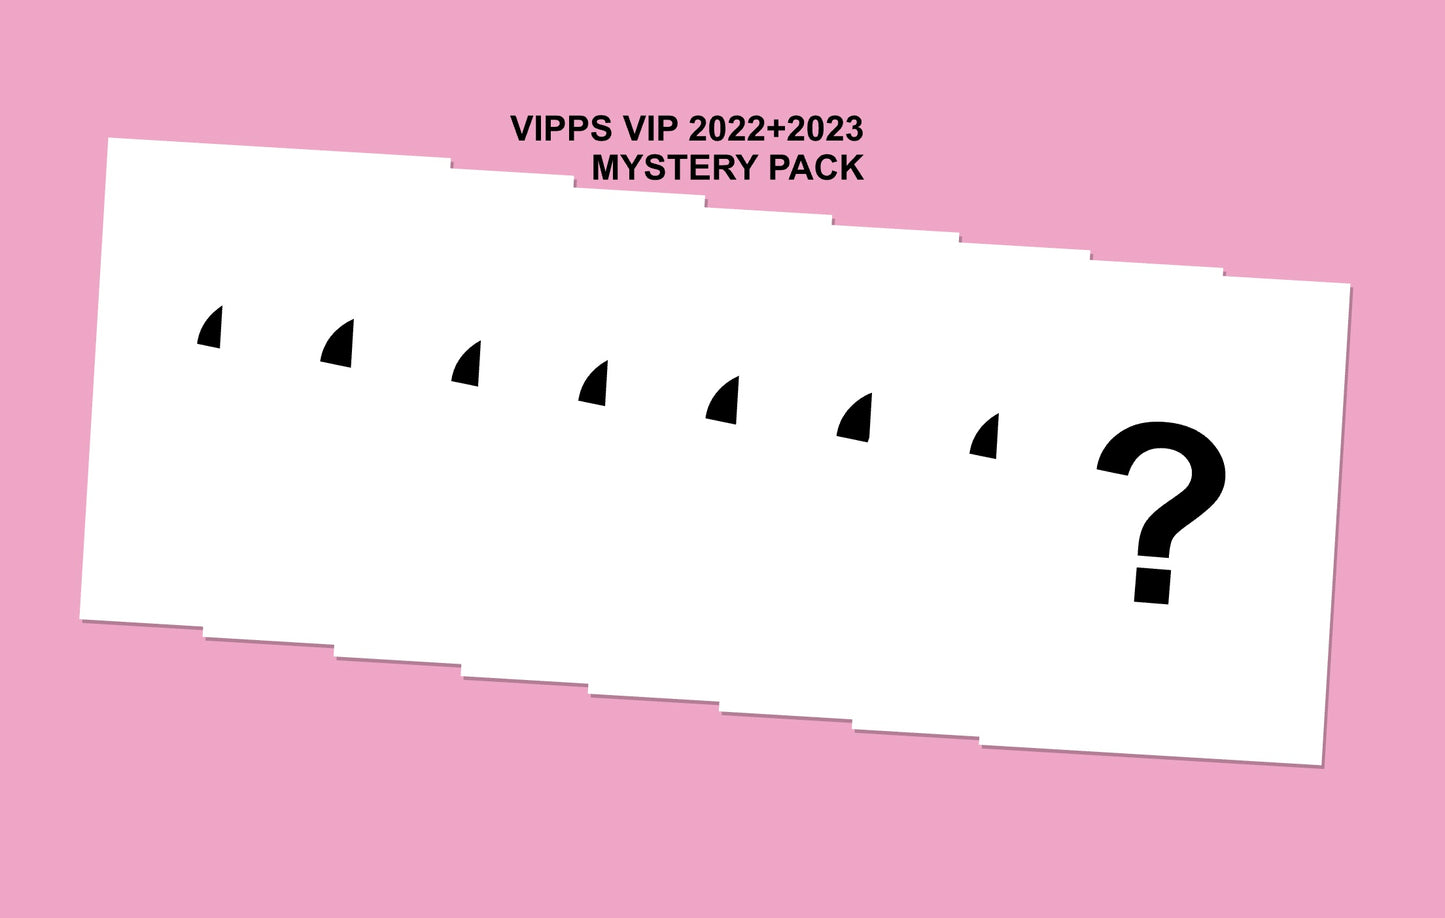 VIPPS VIP 8 SHEET MYSTERY PACK 2022+2023